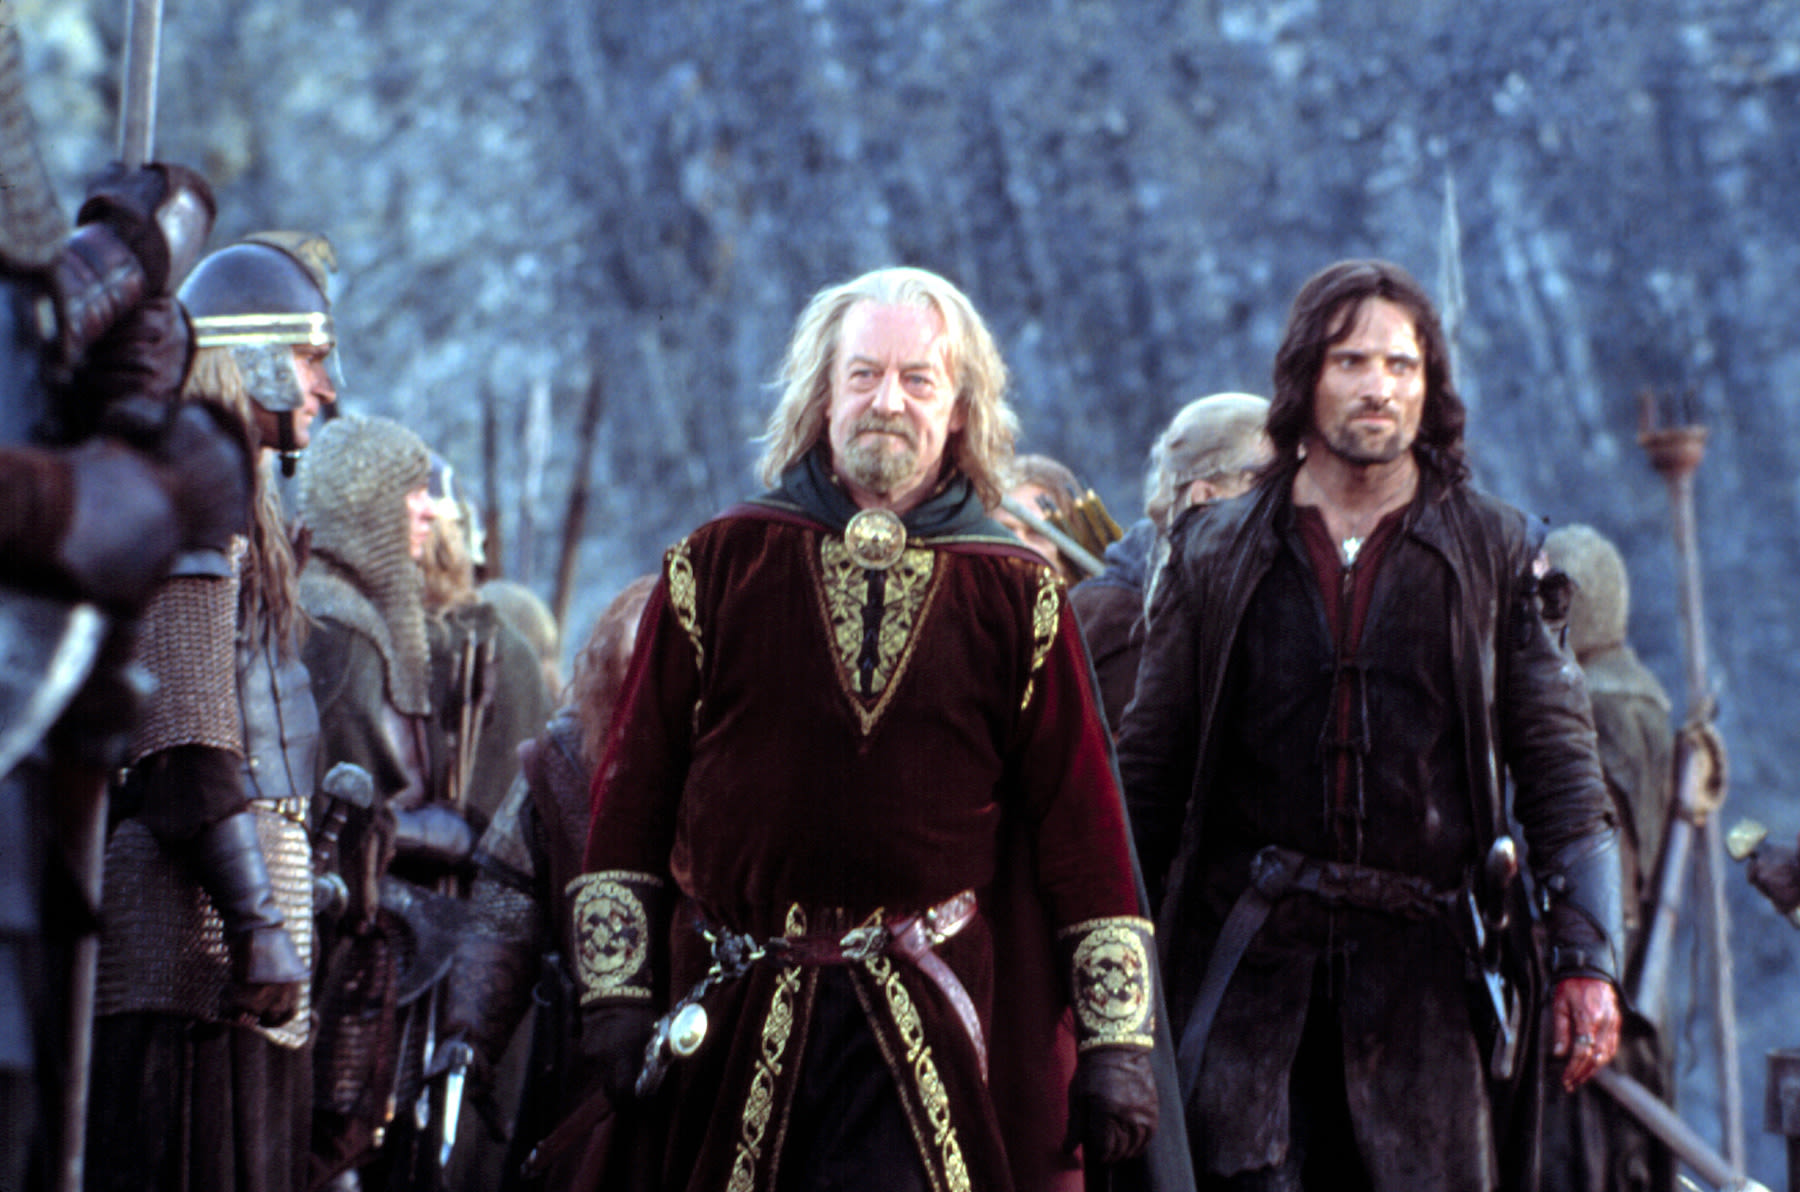 Bernard Hill, ‘Lord of the Rings’ and ‘Titanic’ Actor, Dead at 79